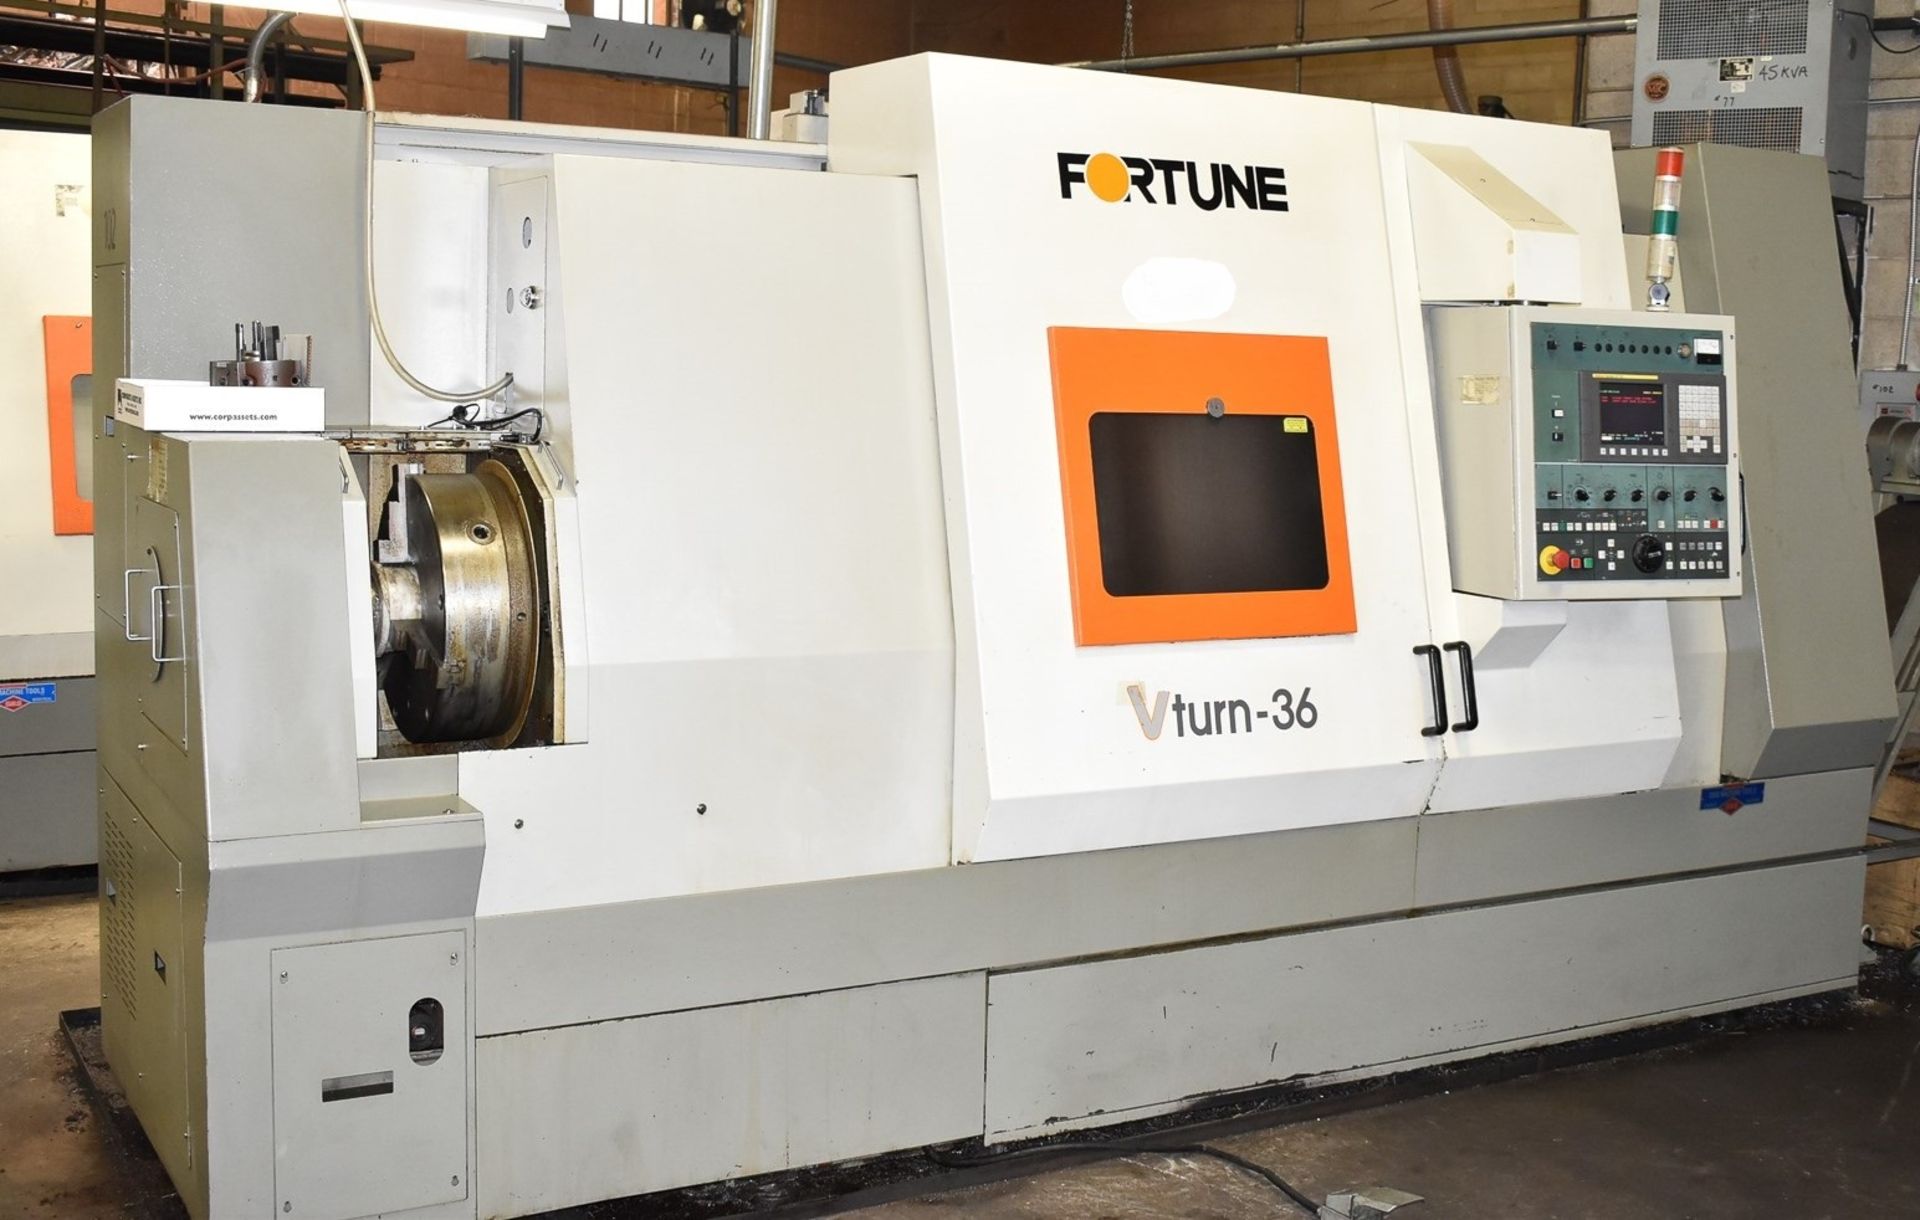 21.65"x35" Victor (Fortune) Mdl Vturn-36 -Axis CNC lathe, S/N ML-1636, New 2007